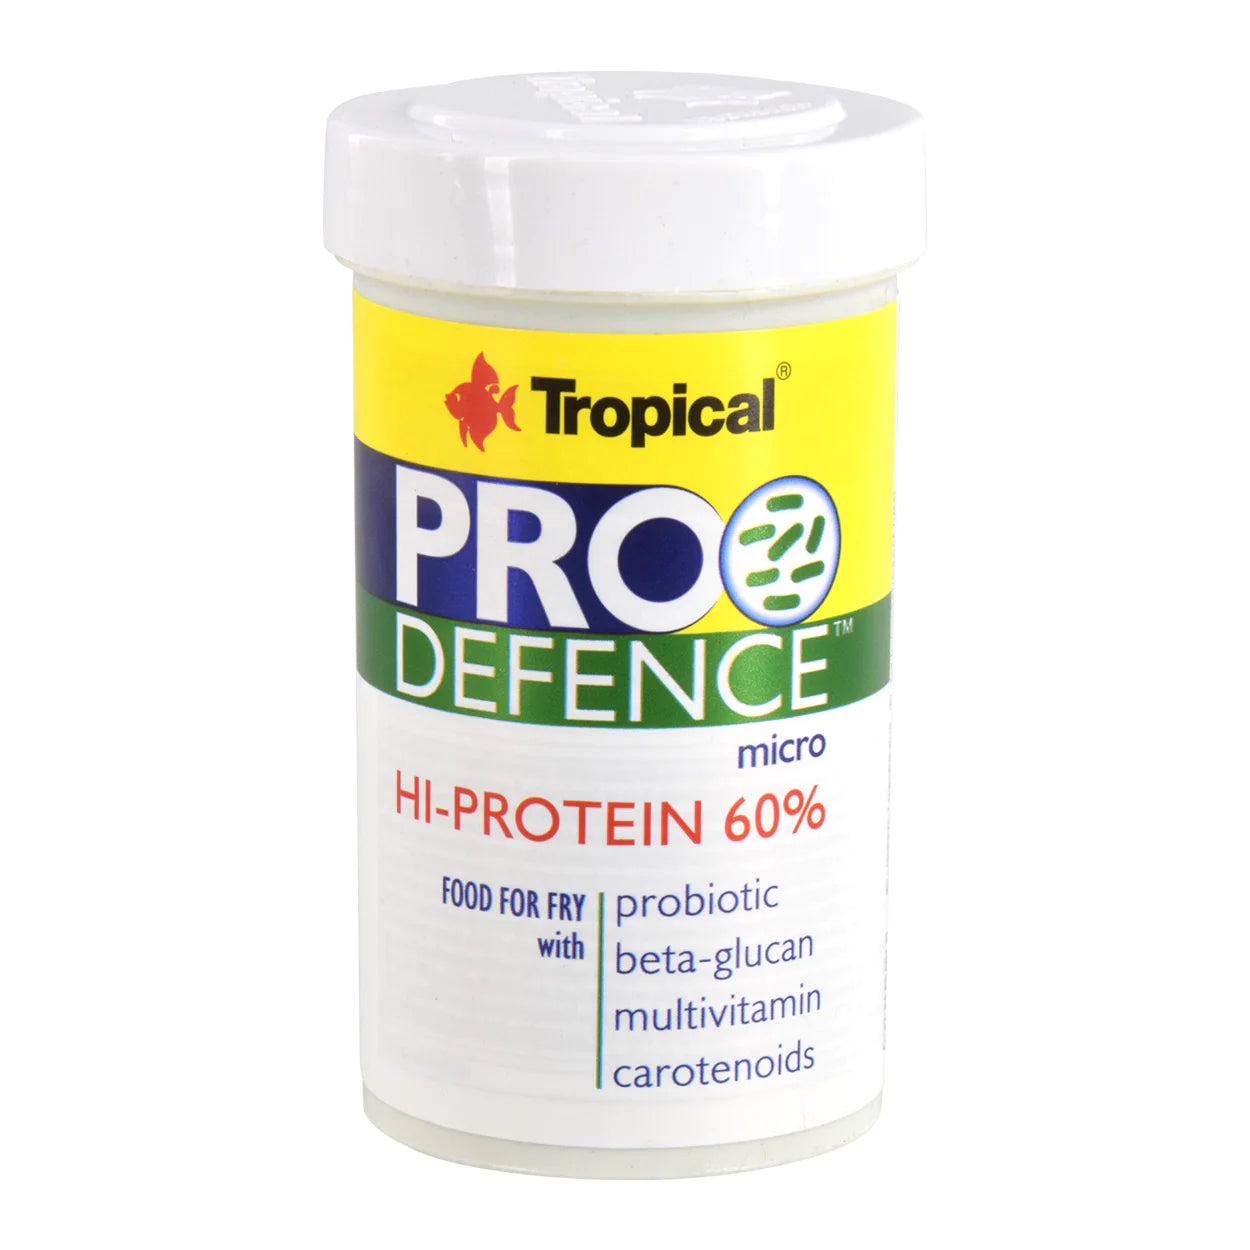 Tropical Pro Defence Micro Probiotic fish food for small fish and fry 